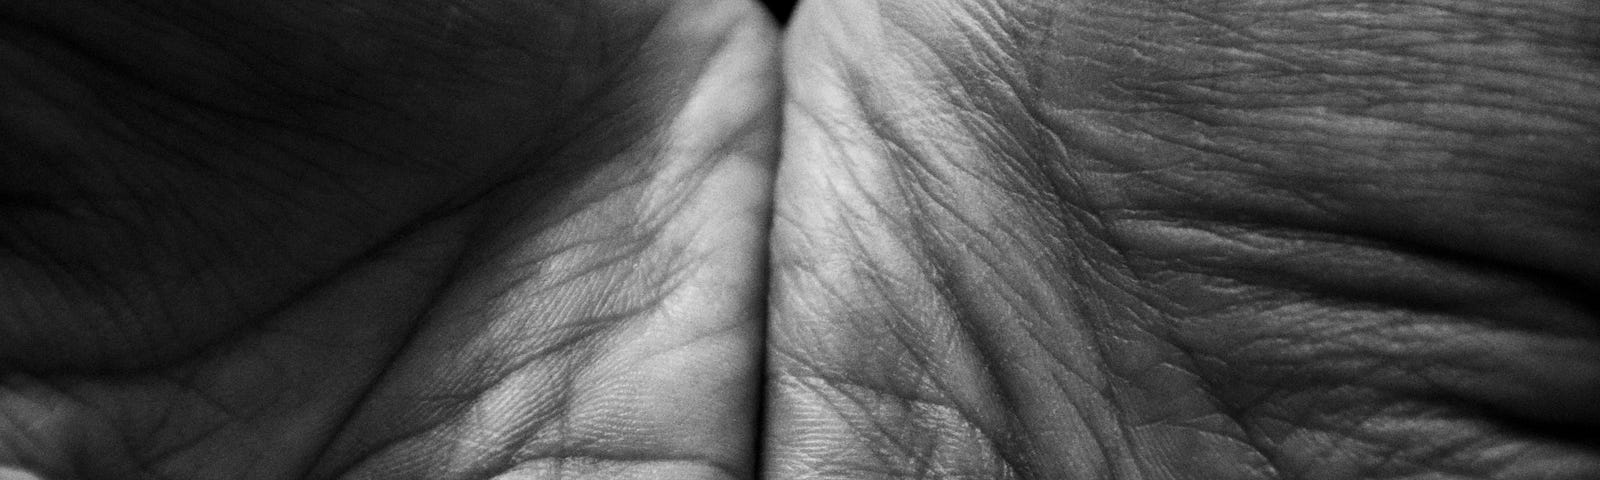 Wrinkled hands offering, palms up, in black and white.